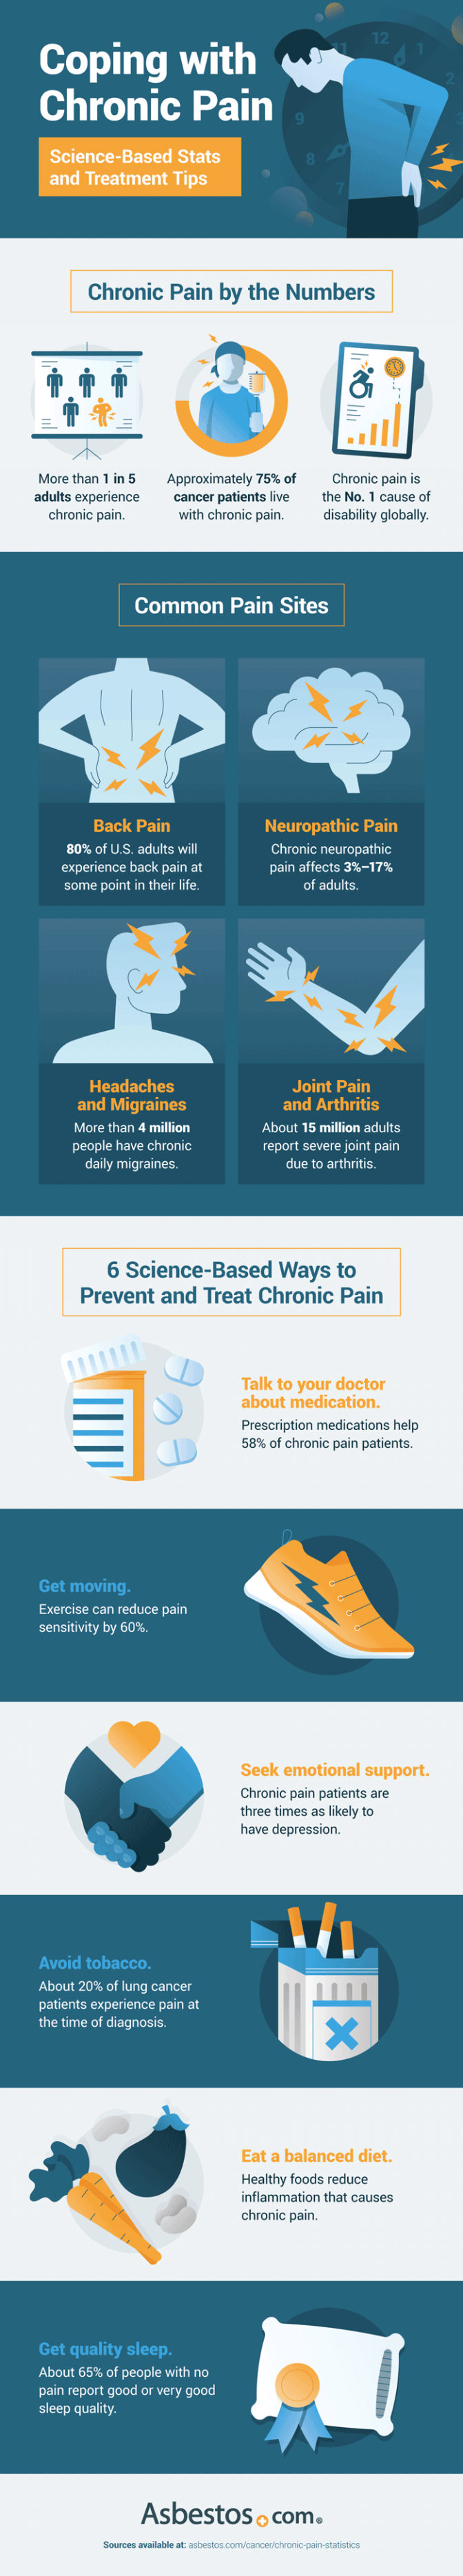 Coping with chronic pain infographic